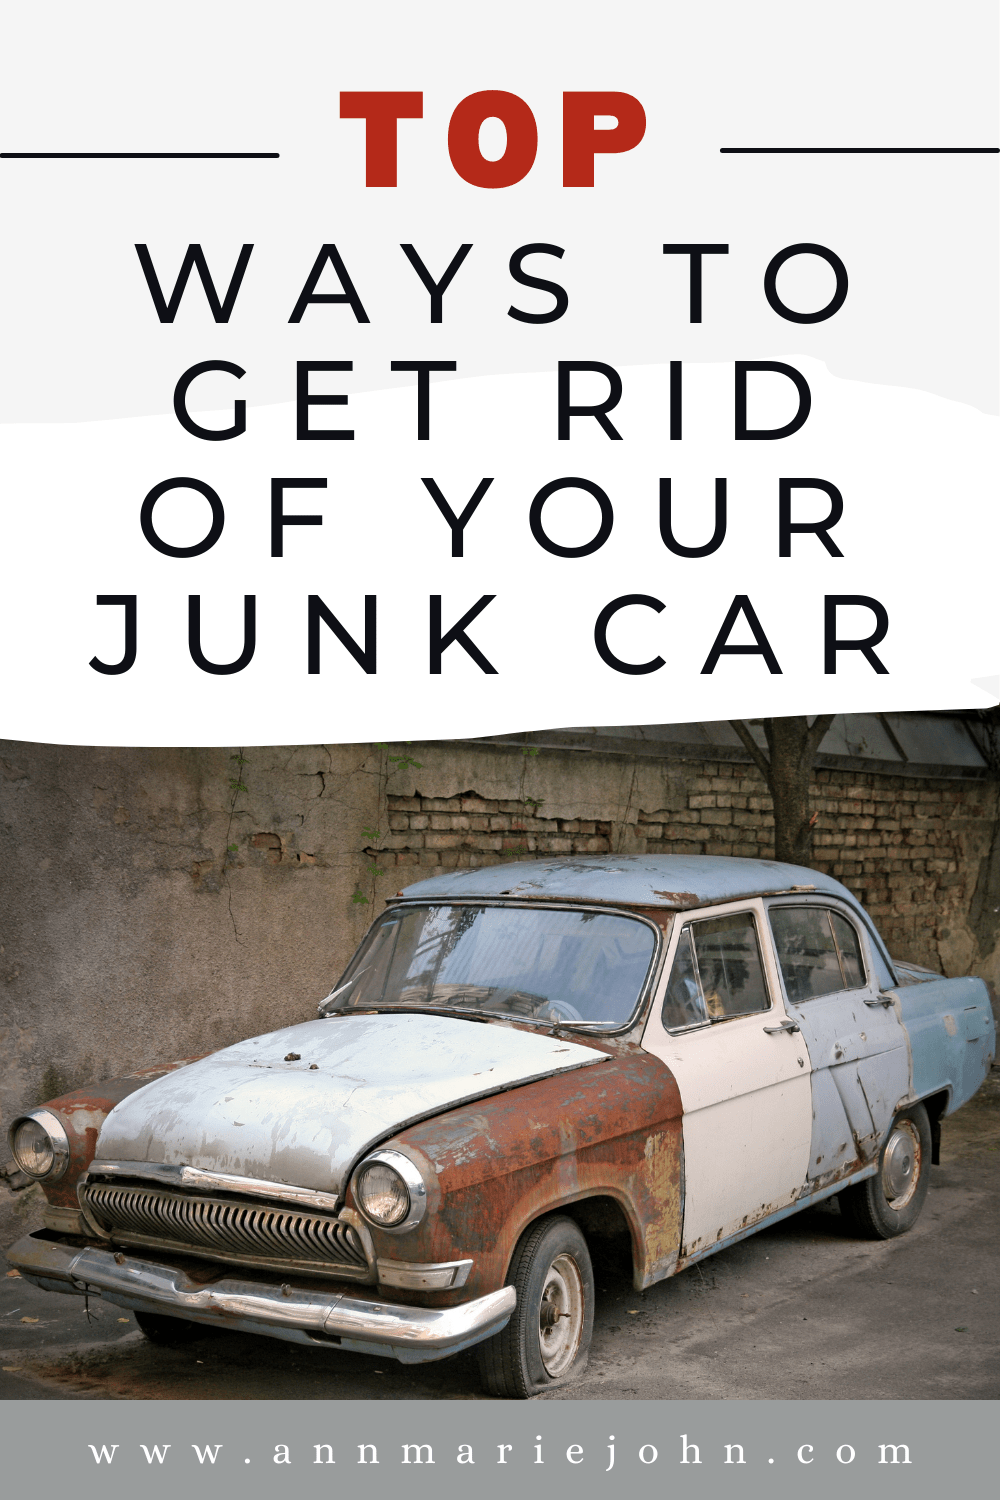 Top Ways to Get Rid of Your Junk Car